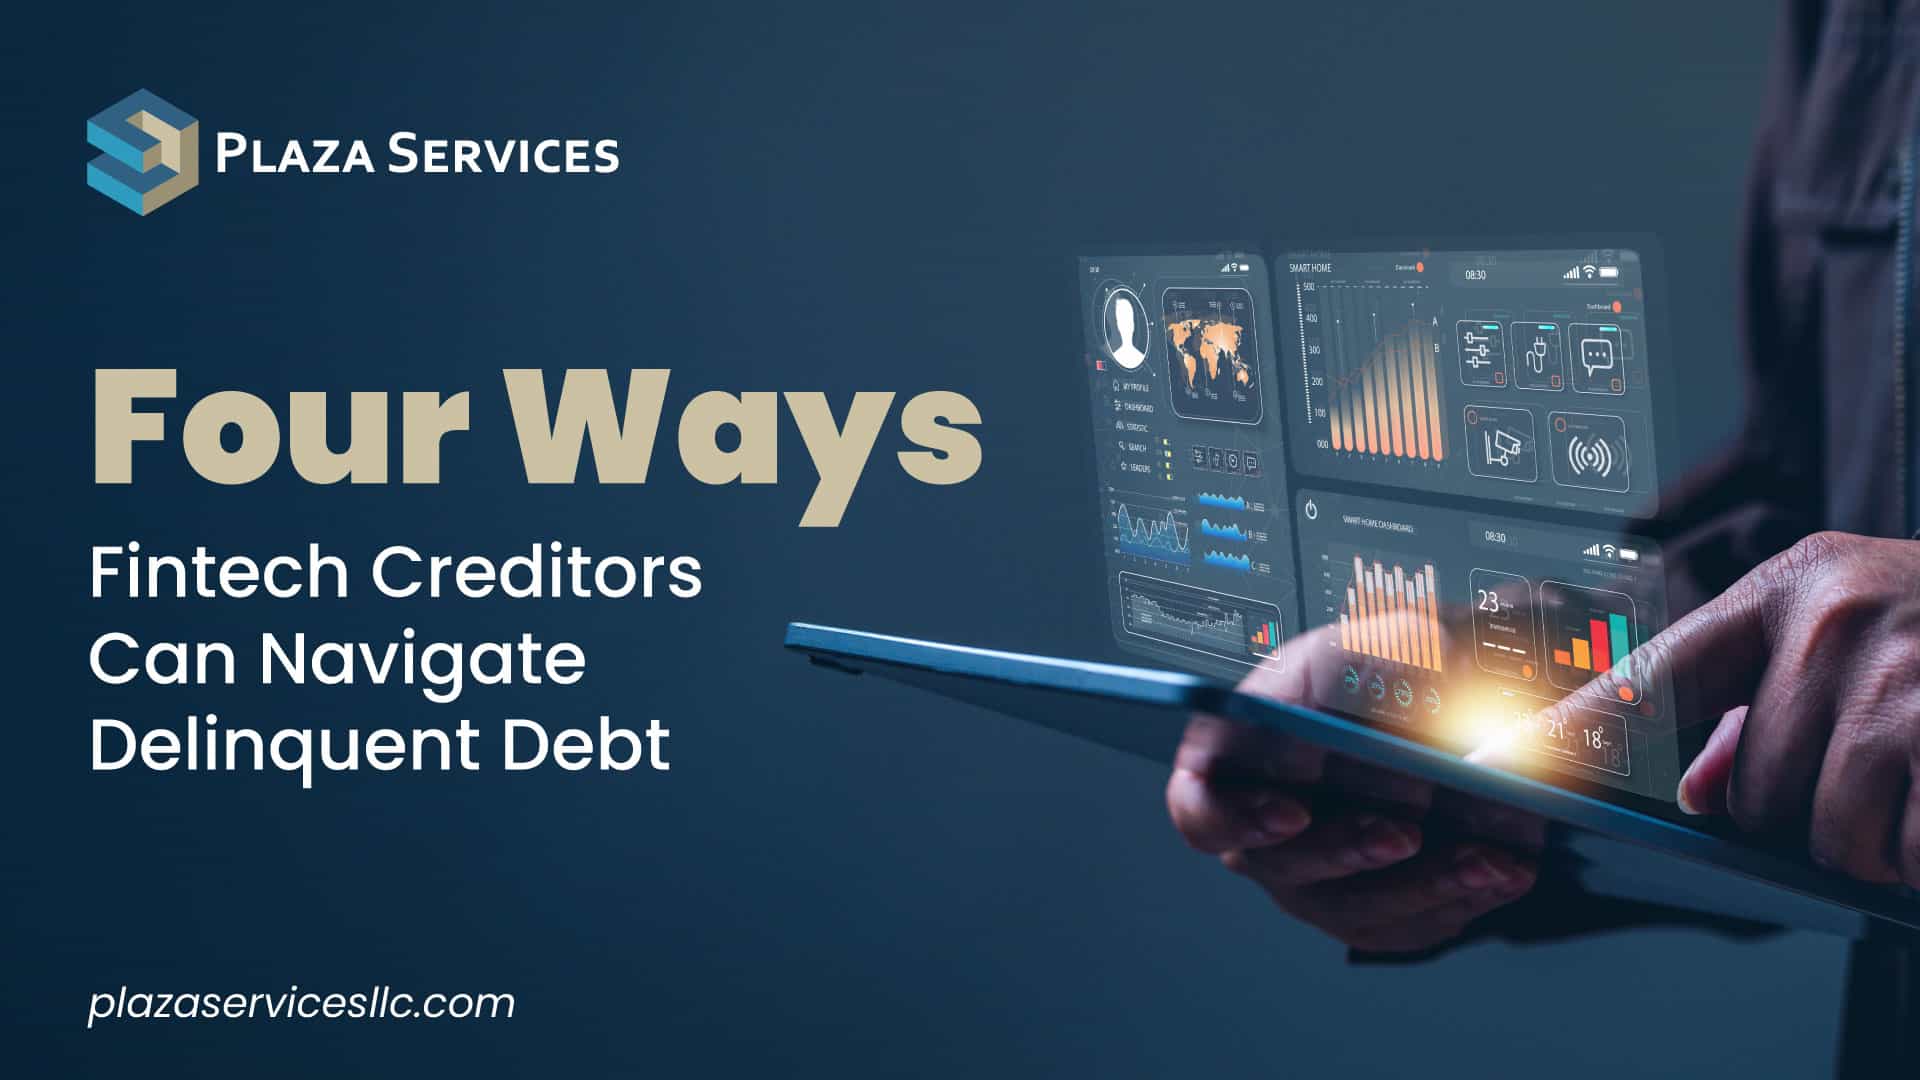 A creditor reviews consumer information to evaluate a plan to recover debt.